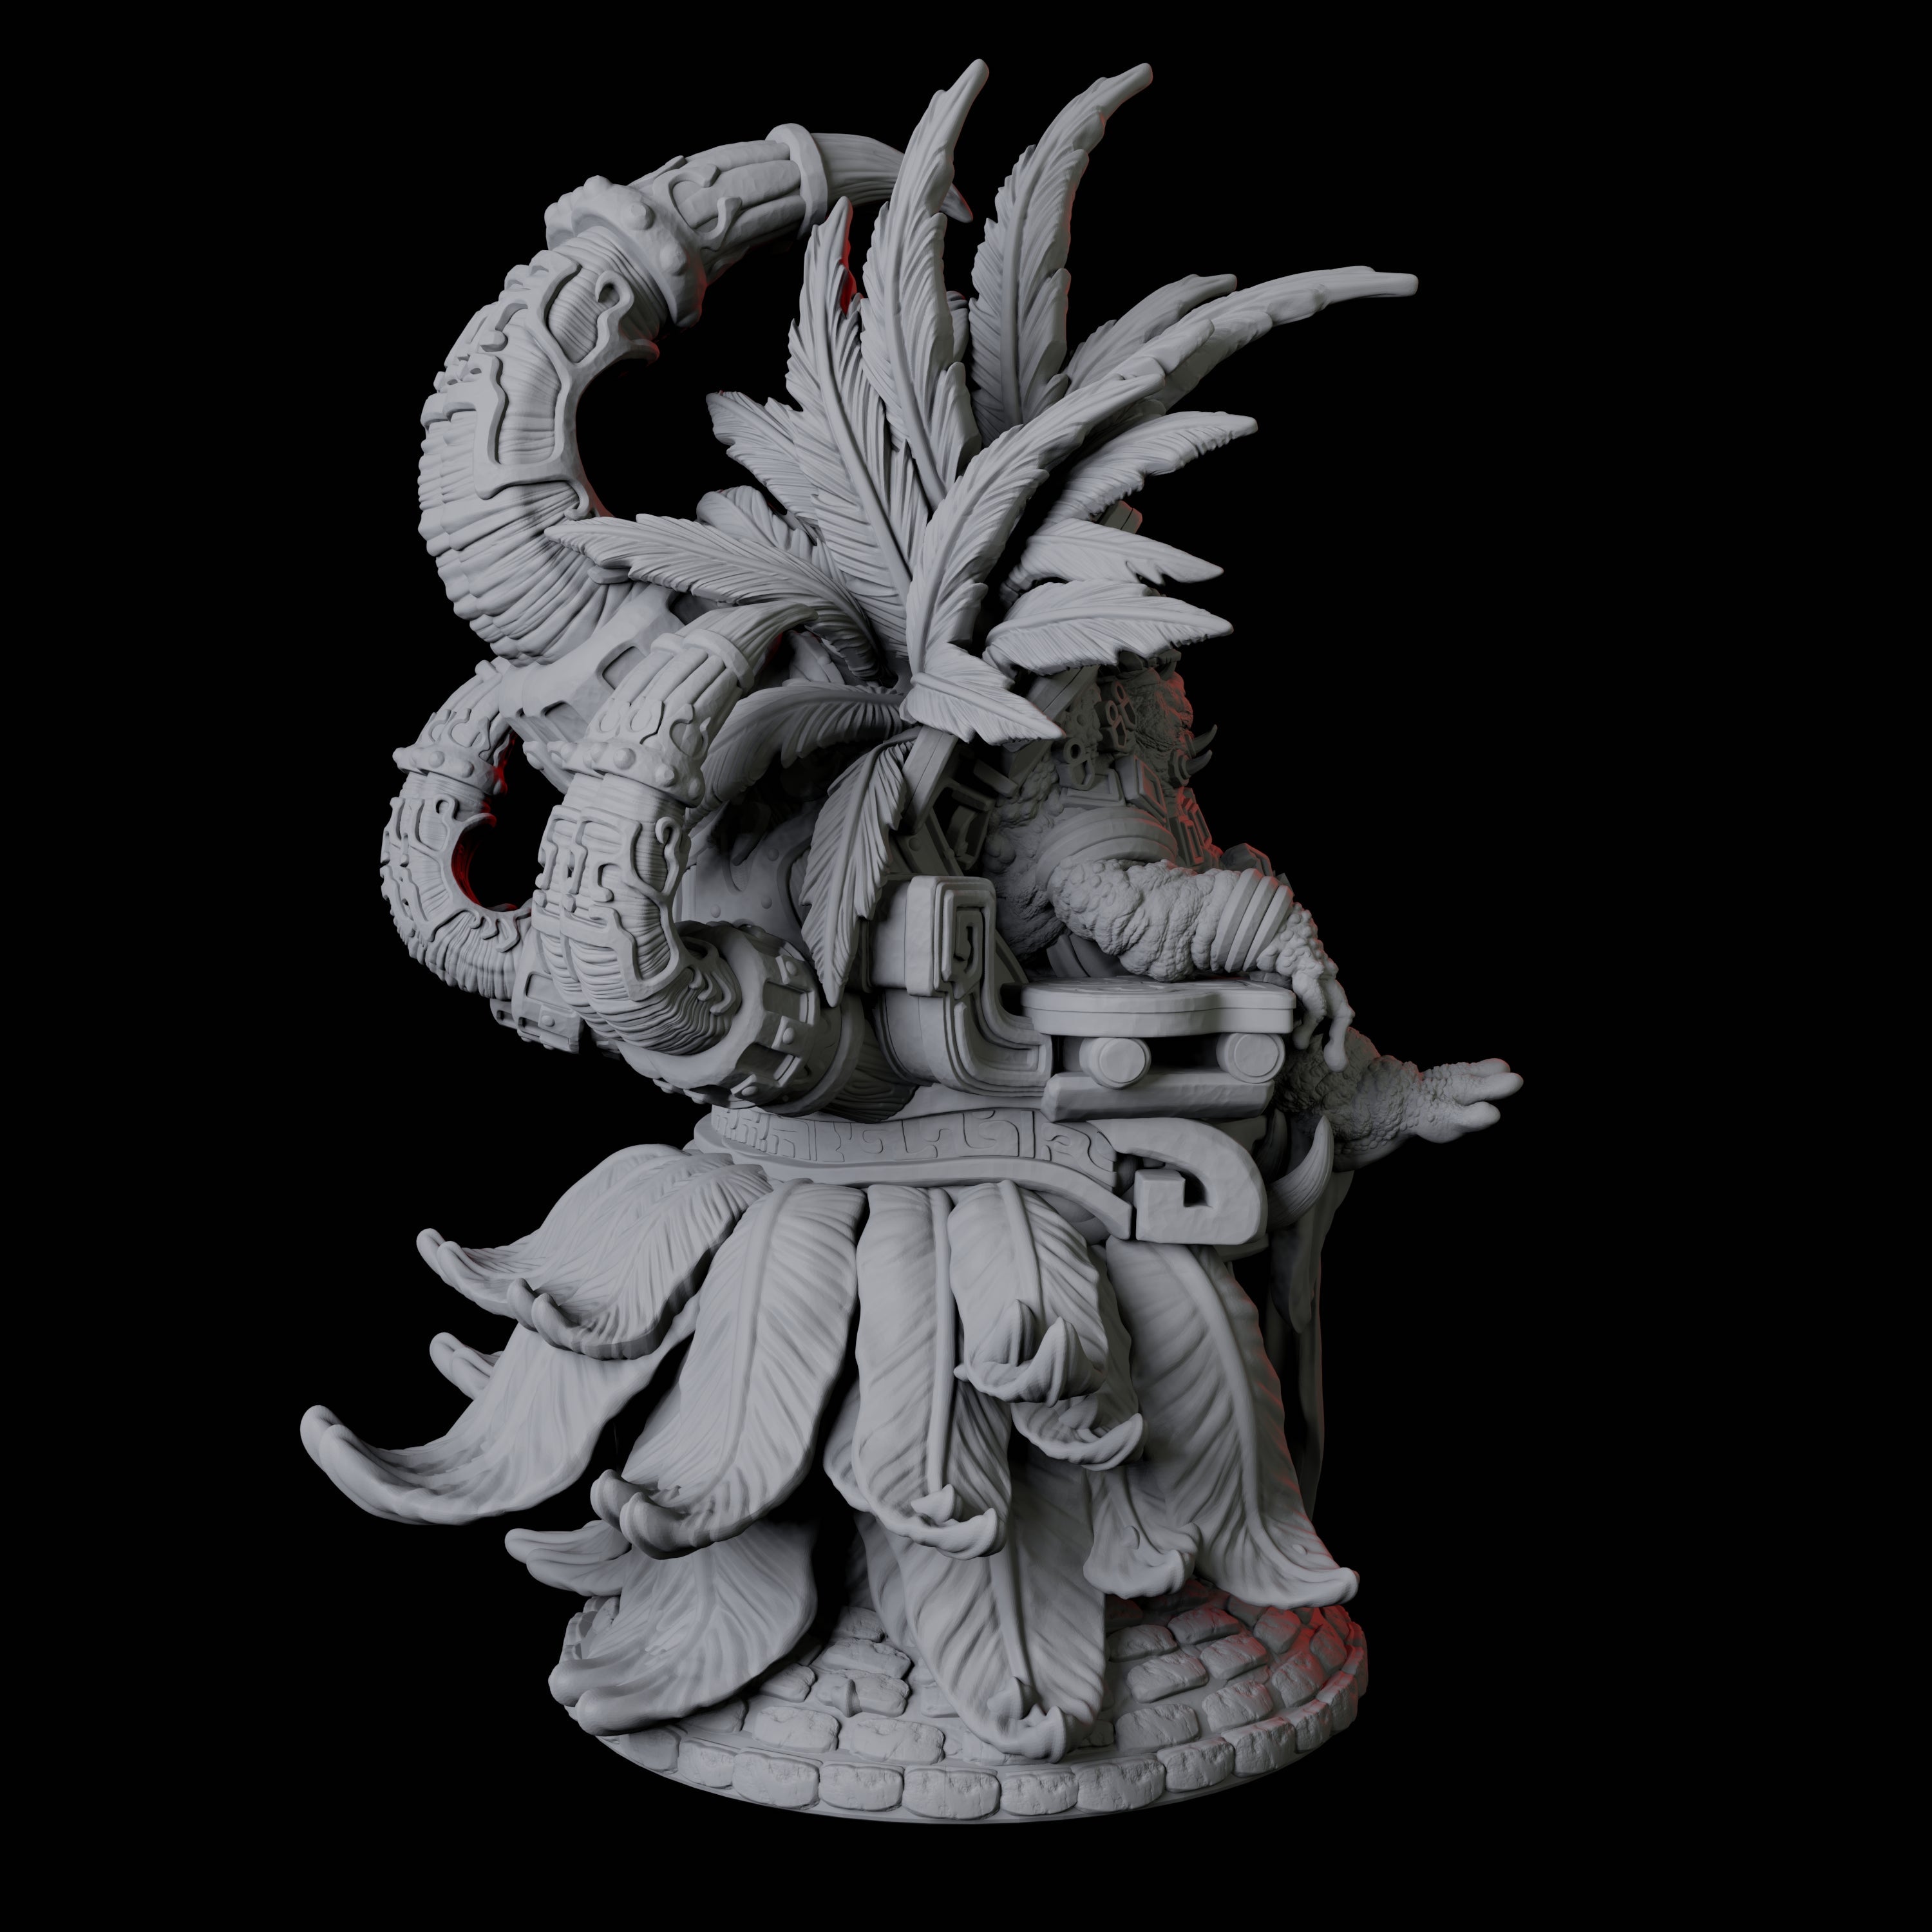 Slaad High Priest Miniature for Dungeons and Dragons, Pathfinder or other TTRPGs